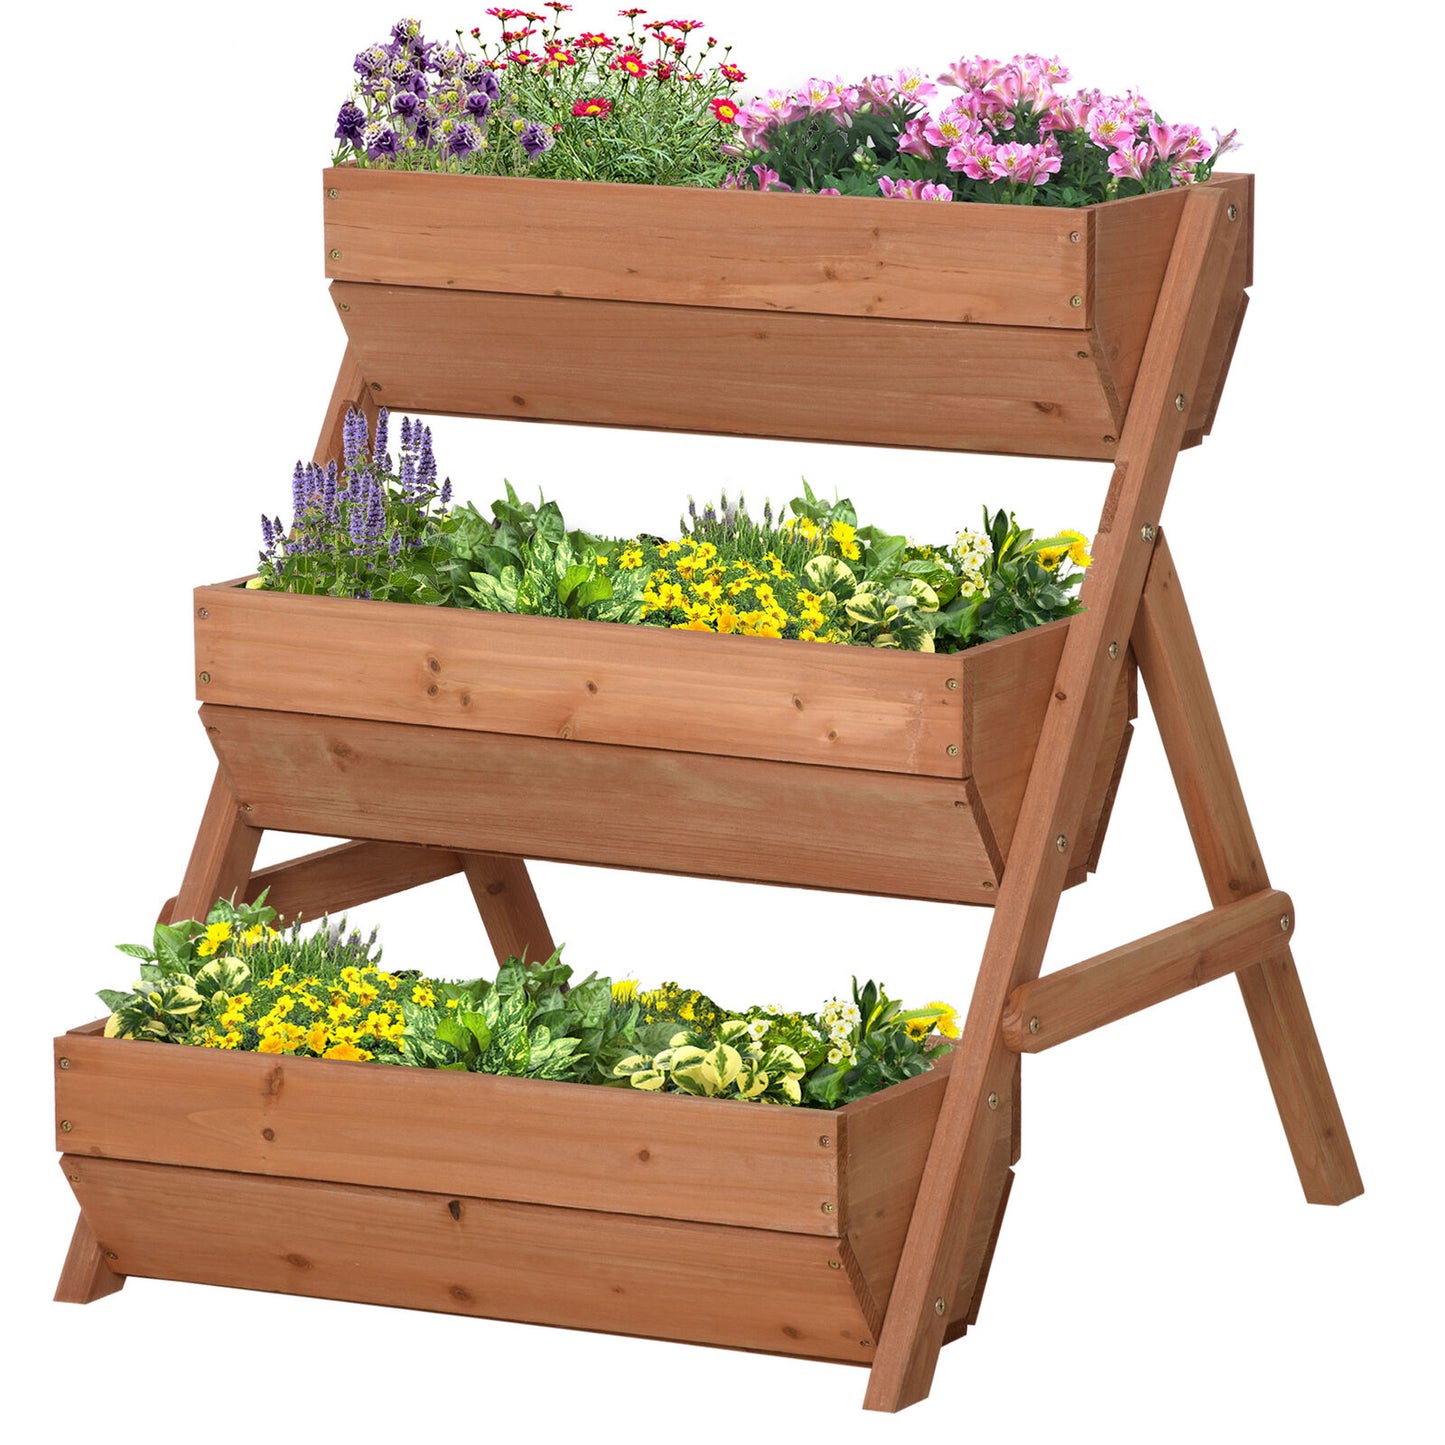 Outsunny 3 Tier Raised Garden Bed Wooden Elevated Planter Box Kit, Brown